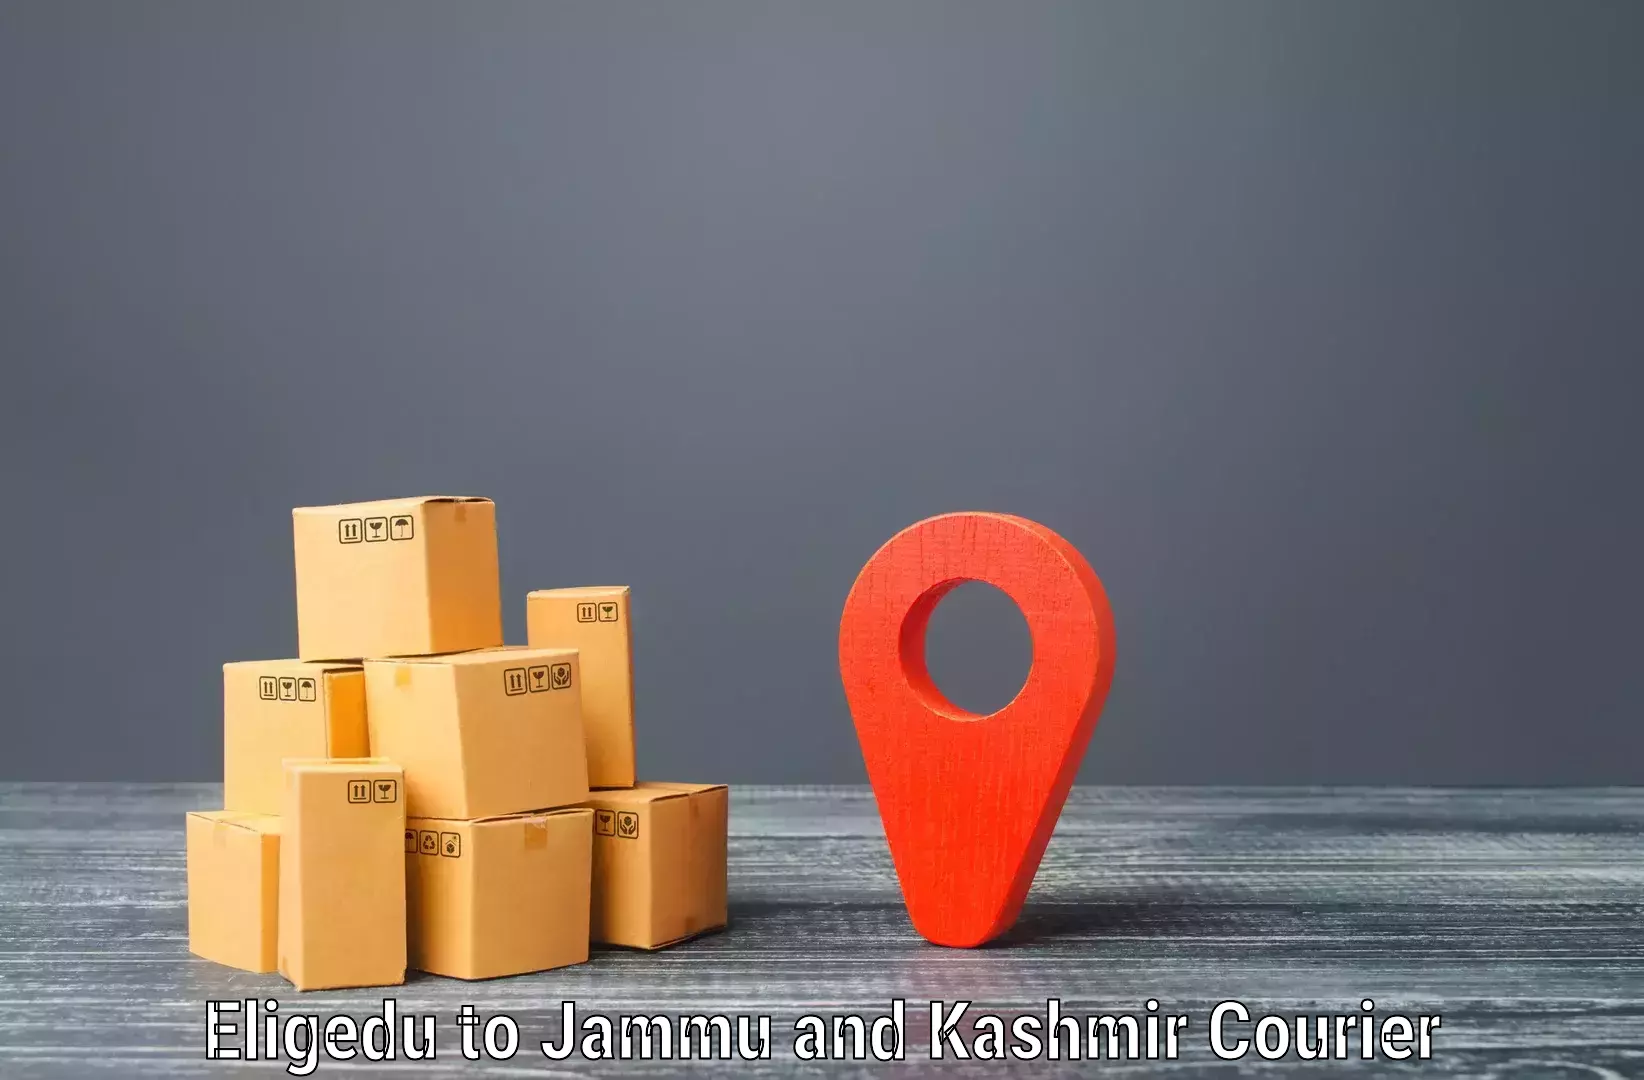 Efficient courier operations in Eligedu to Jammu